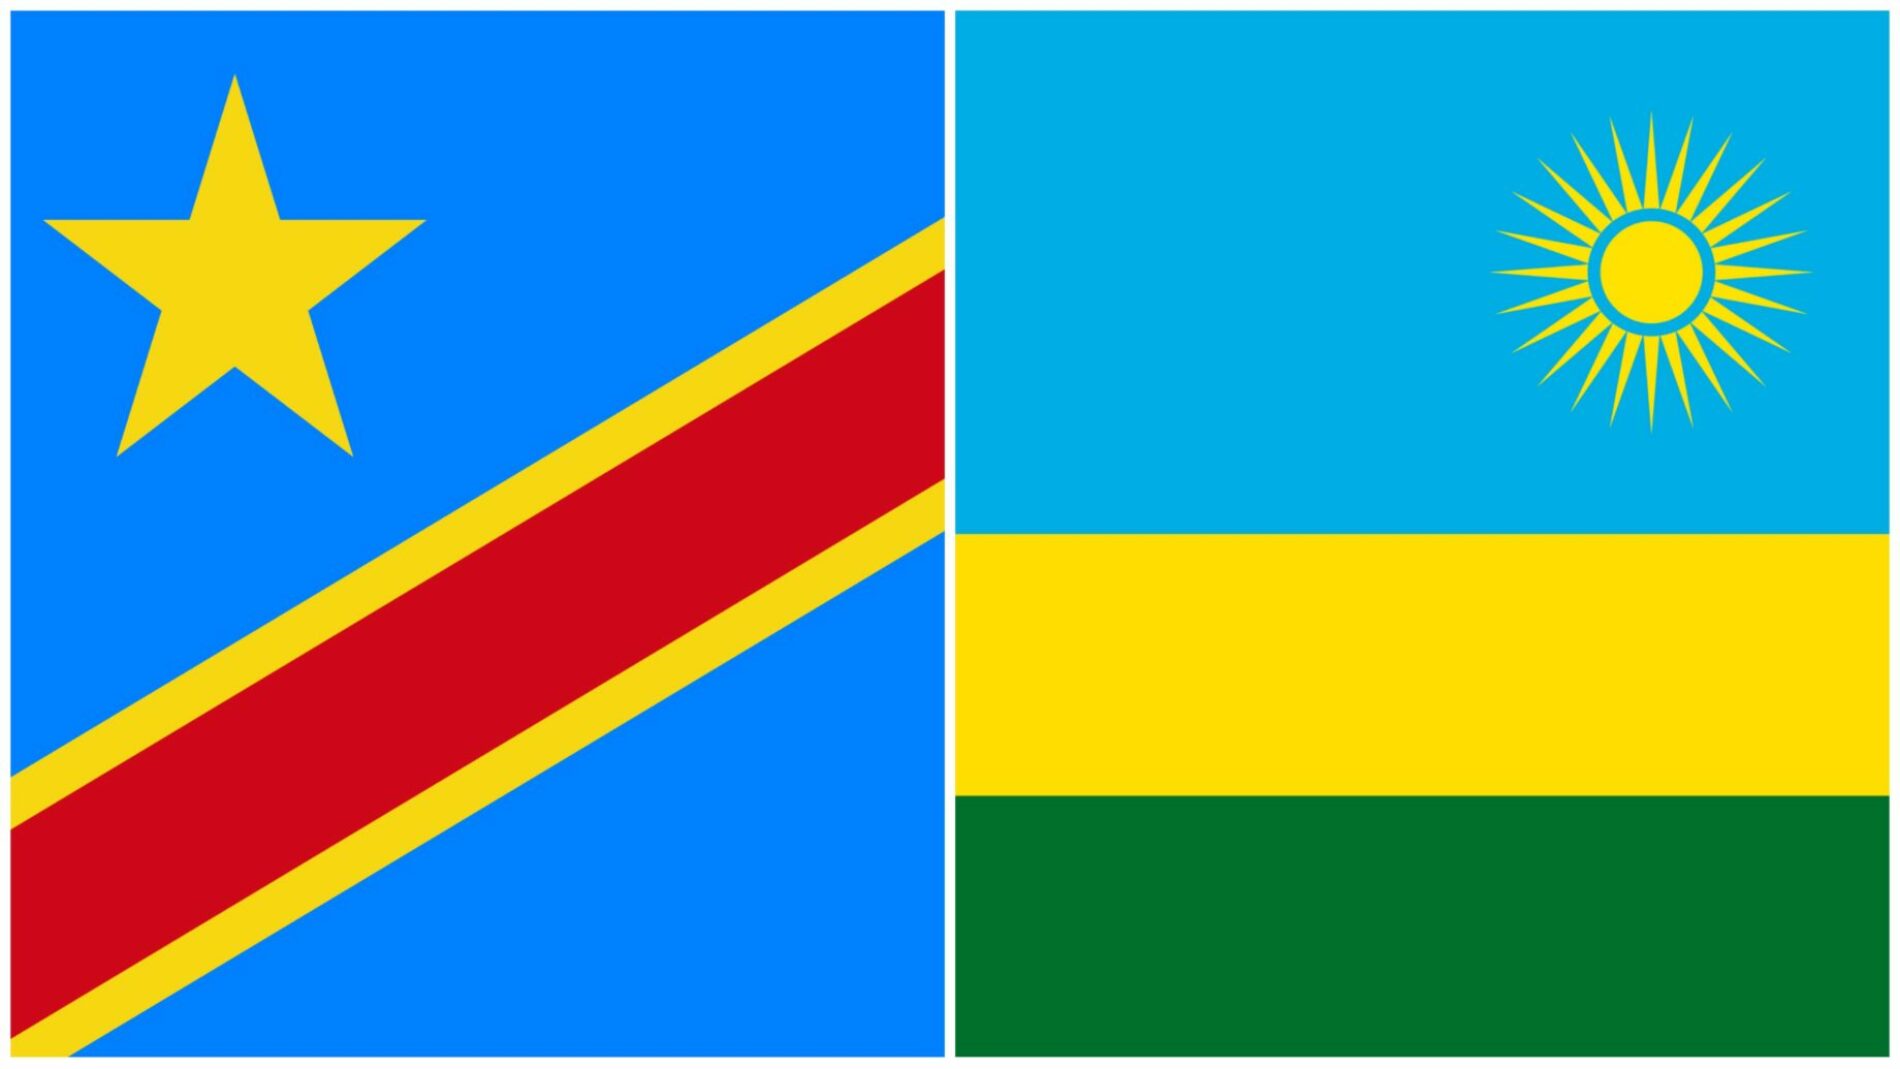 Rwanda-DRC : spying accusations by the DRC presage an escalation of public incitement to violence